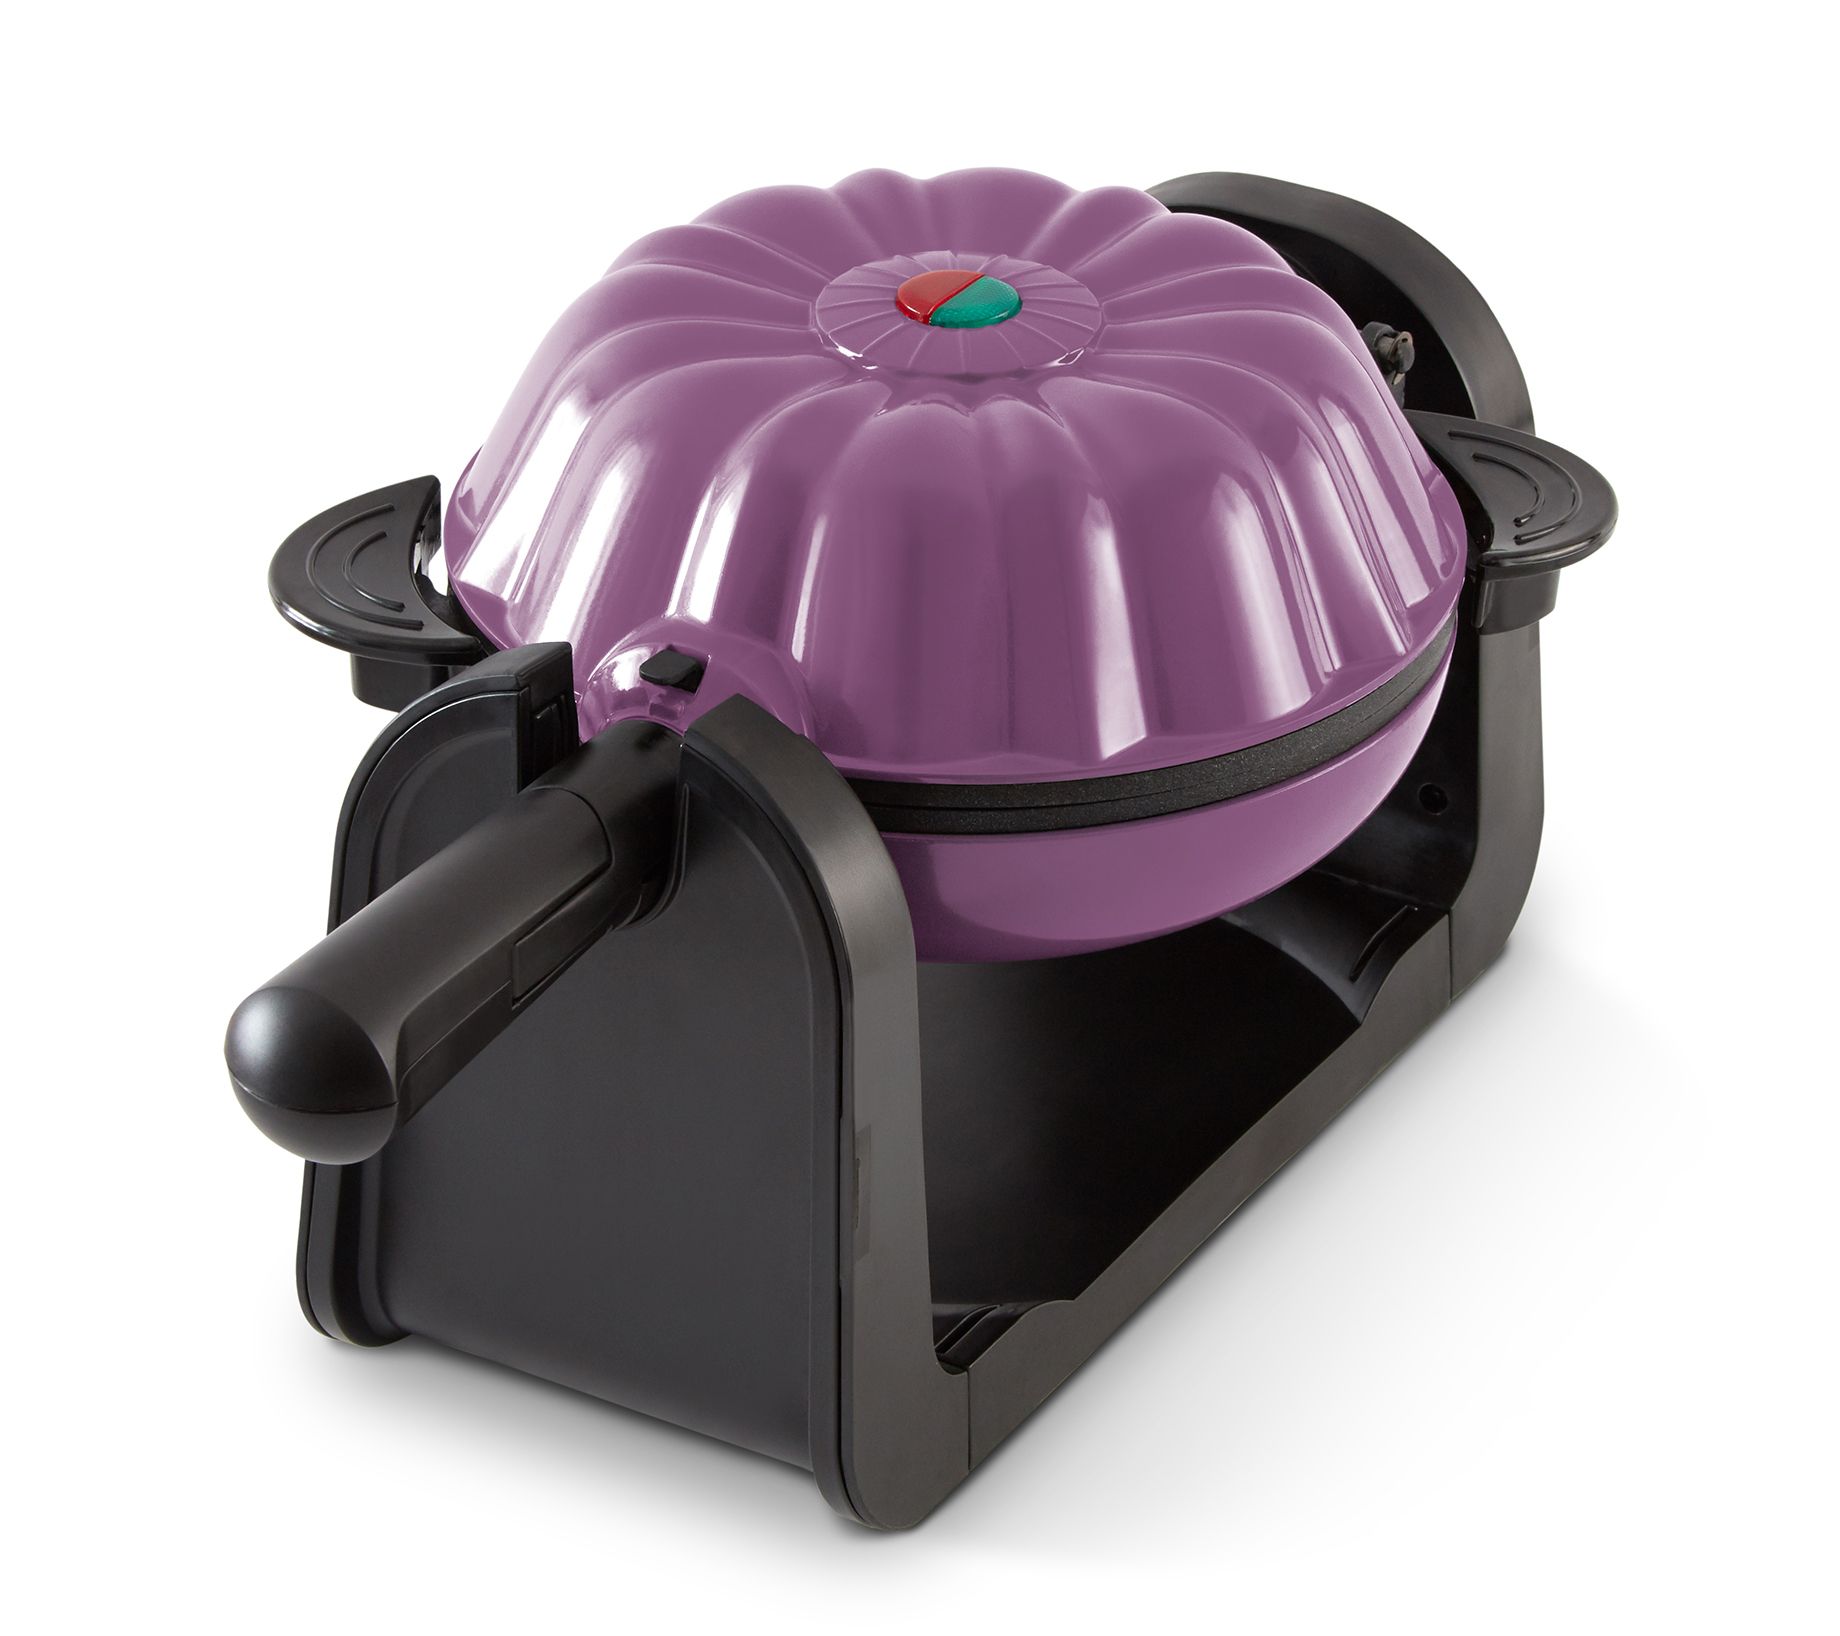 HOW TO USE THE MINI BUNDT CAKE MAKER FROM DASH ~ So Easy and Super Fun! 